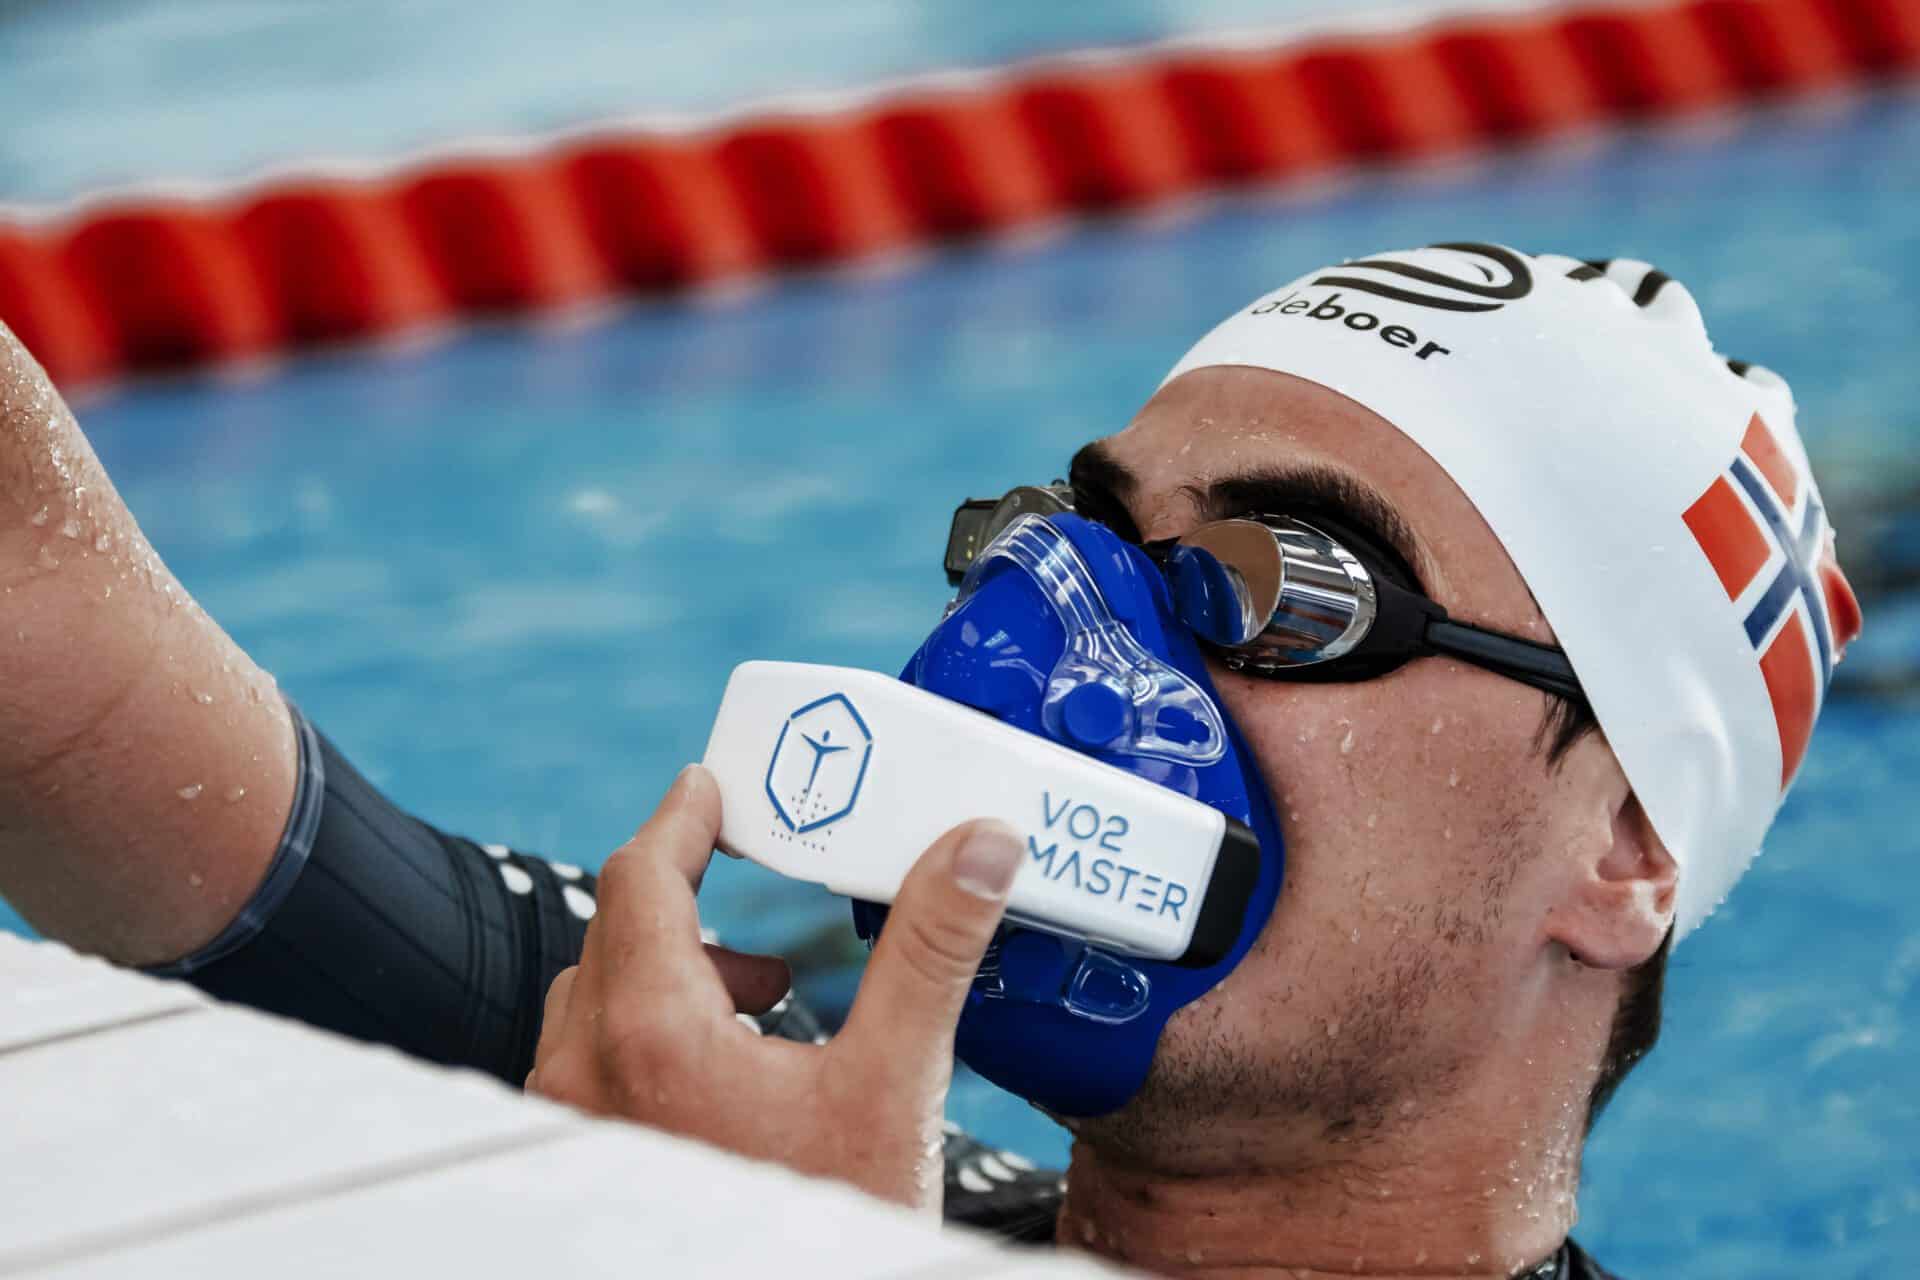 Swimmer coming up for air in a pool and breathing through the VO2 Master mask and performance analyzer